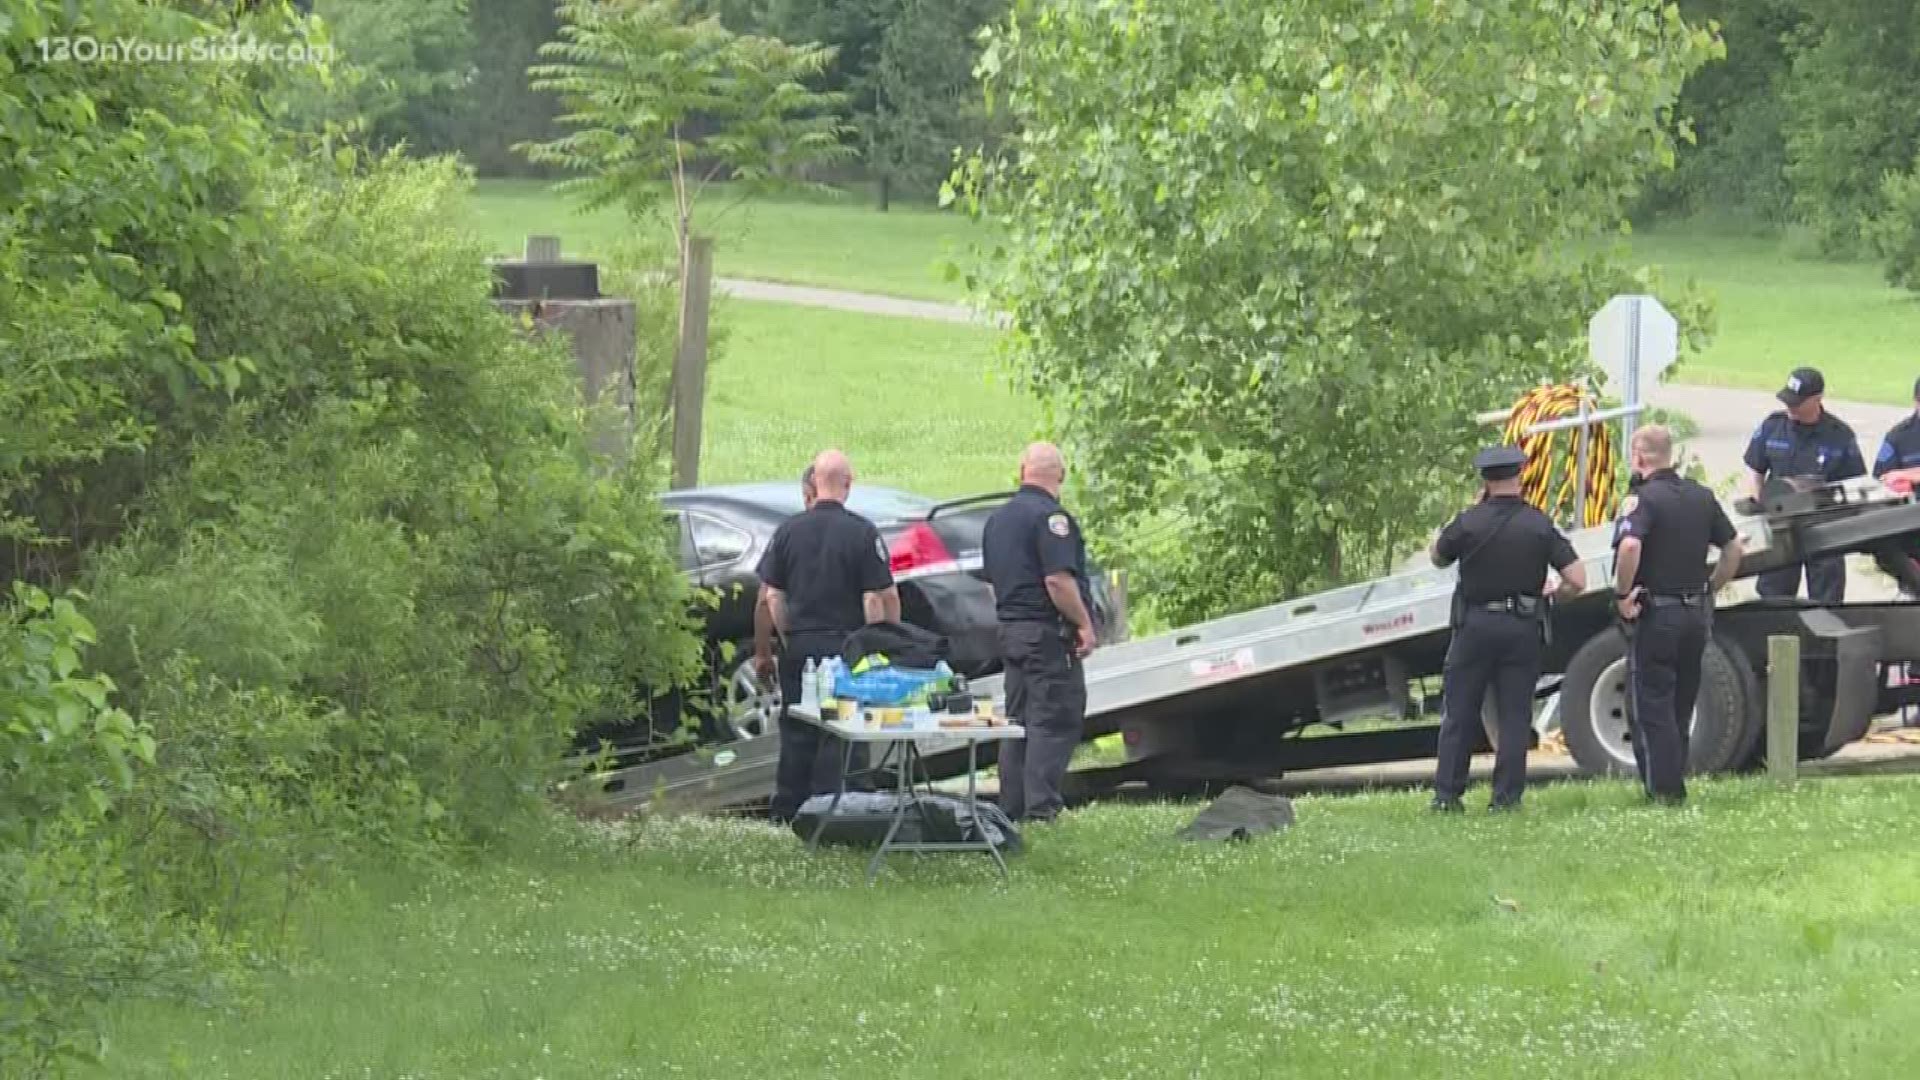 Police say the mother intentionally drove her vehicle into the river.